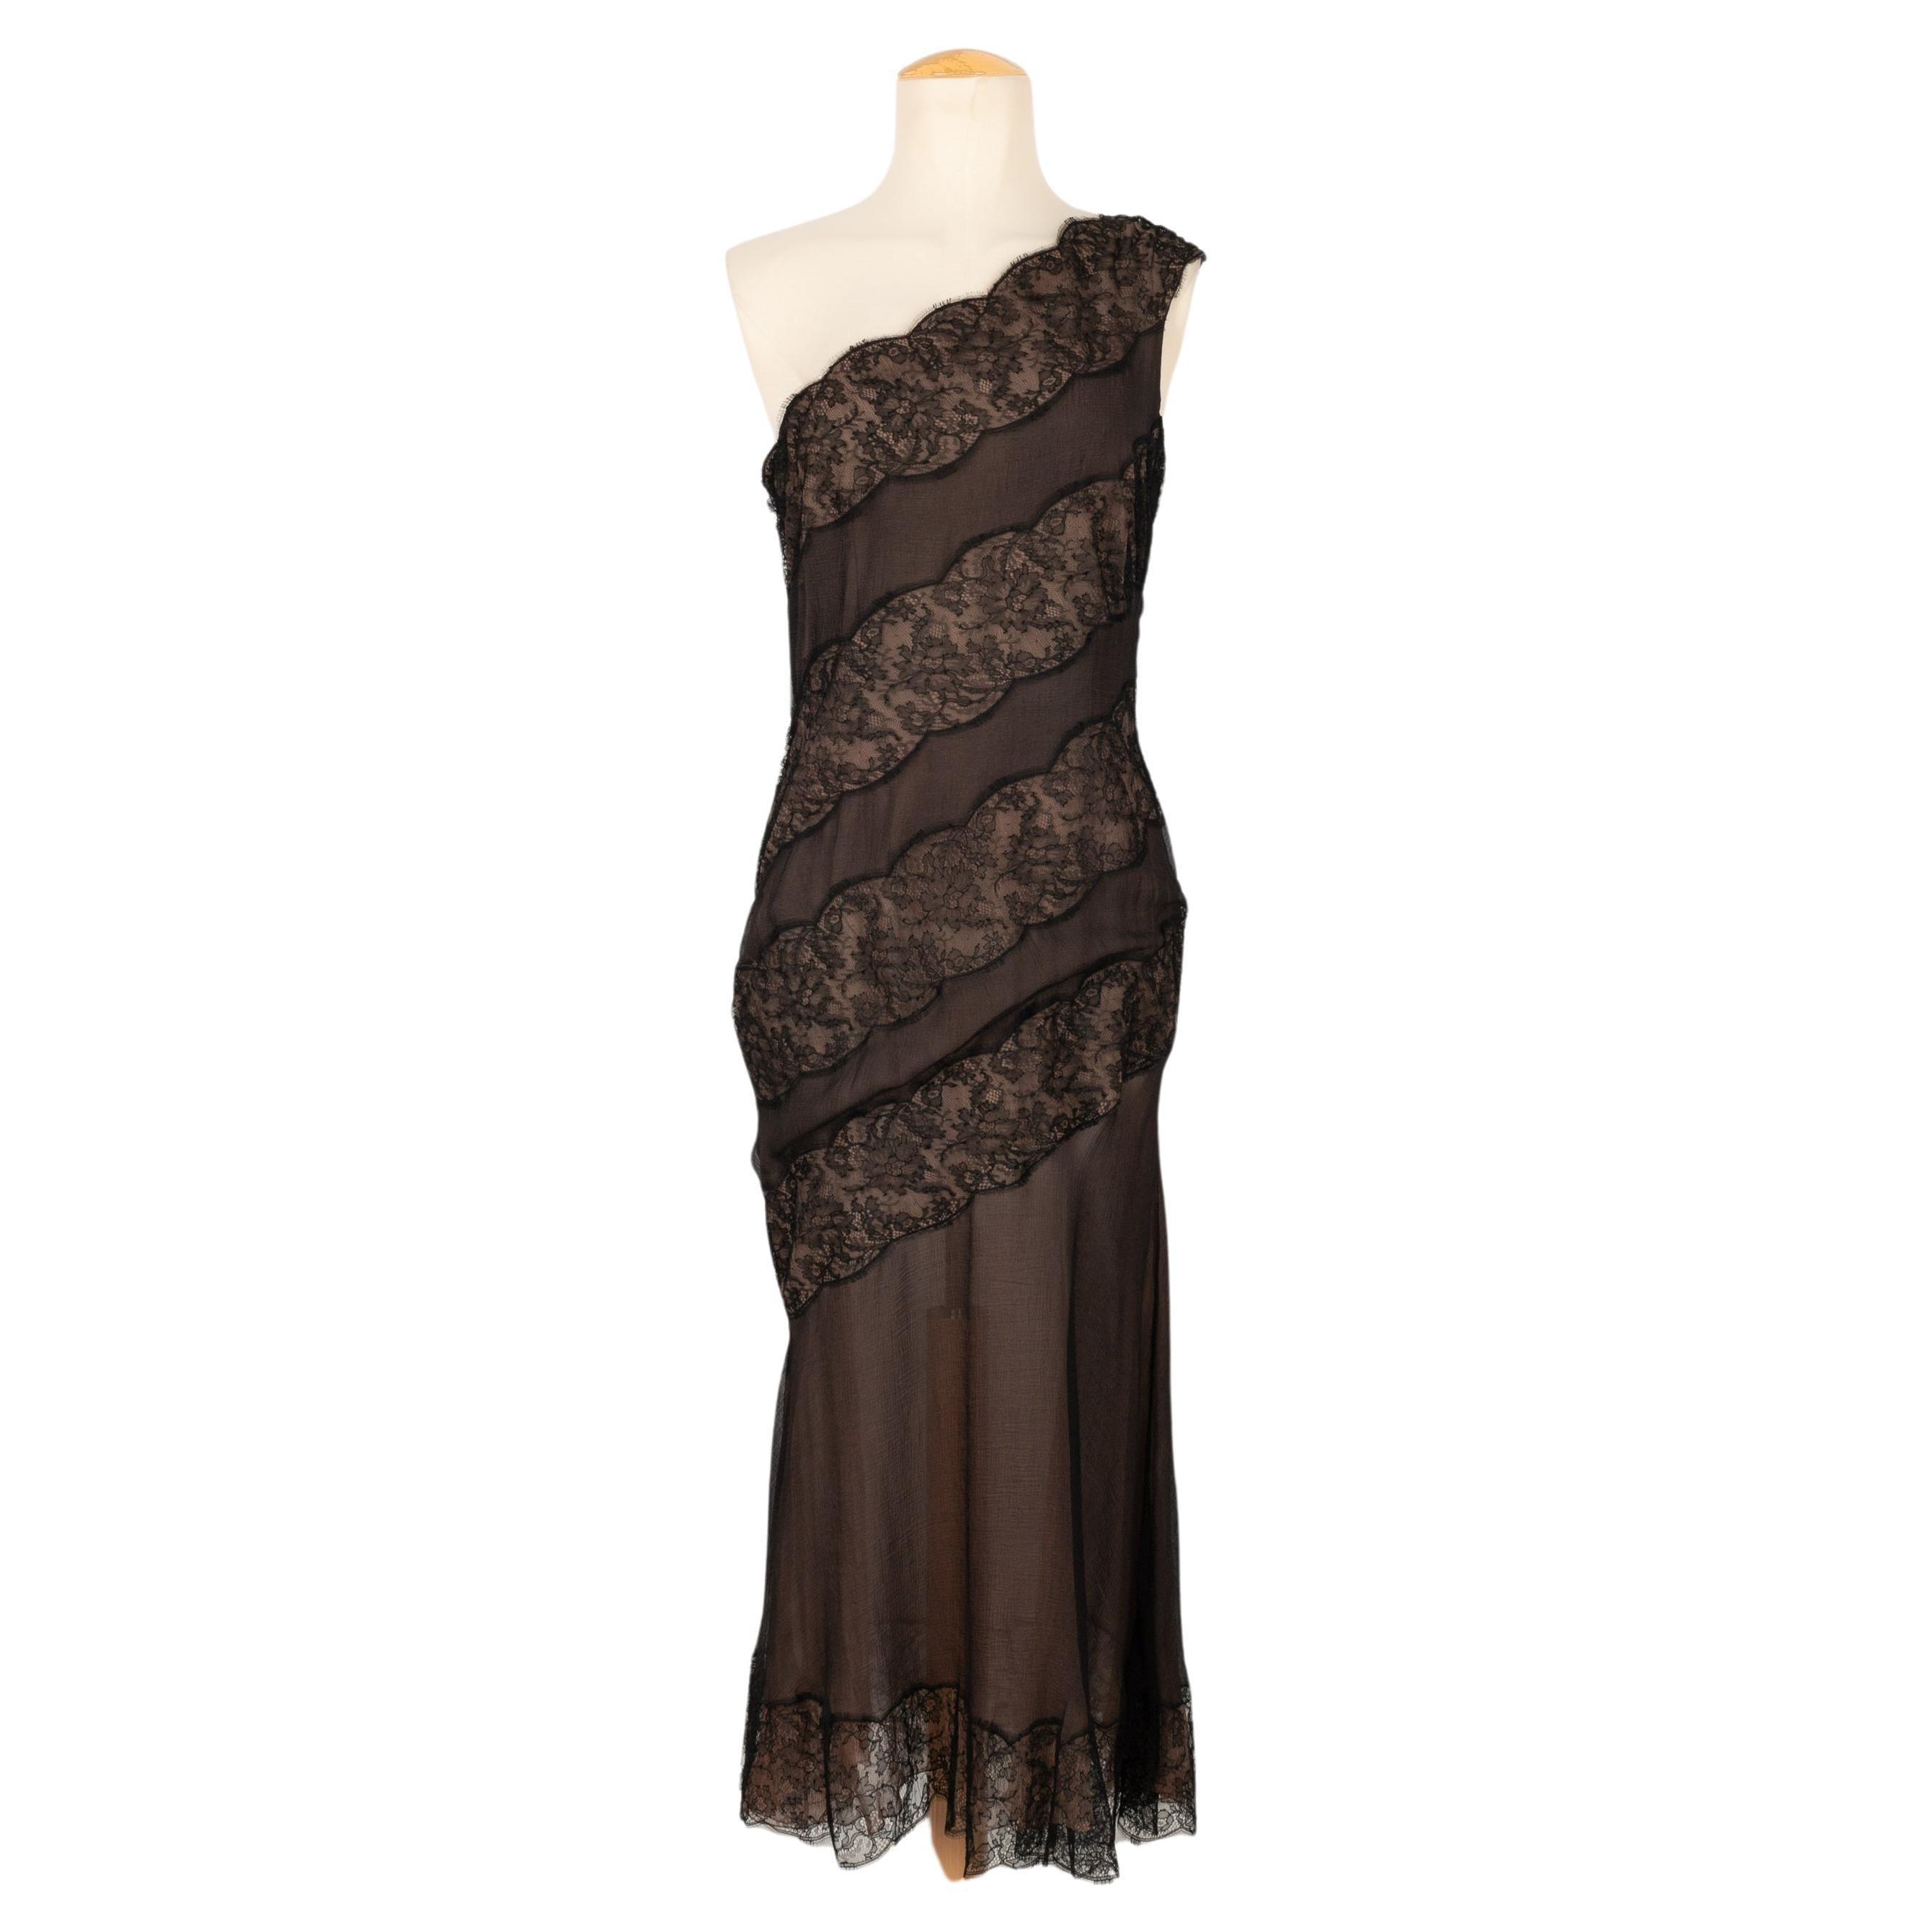 Balmain Couture Dress in Silk Crepe and Transparent Black Lace, circa 1990s For Sale